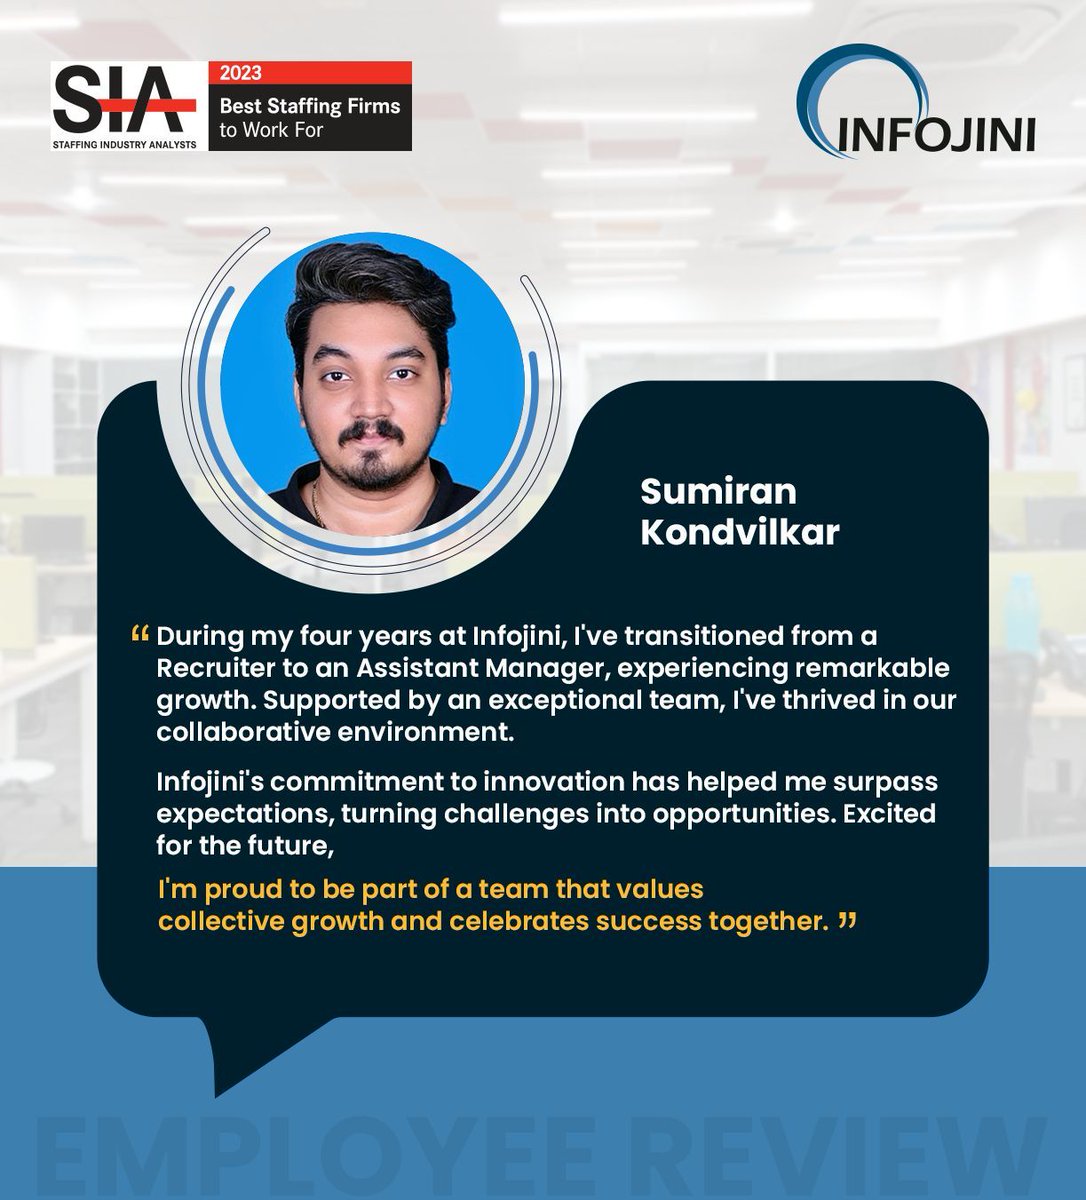 We are thrilled to hear from our dedicated employees like Sumiran Kondvilkar!

Thank you for being a part of our journey and for helping us create a #workplace where our employees can thrive!

#testimonial #workculture #BestPlacetoWork #LifeAtInfojini #TeamInfojini #Infojini